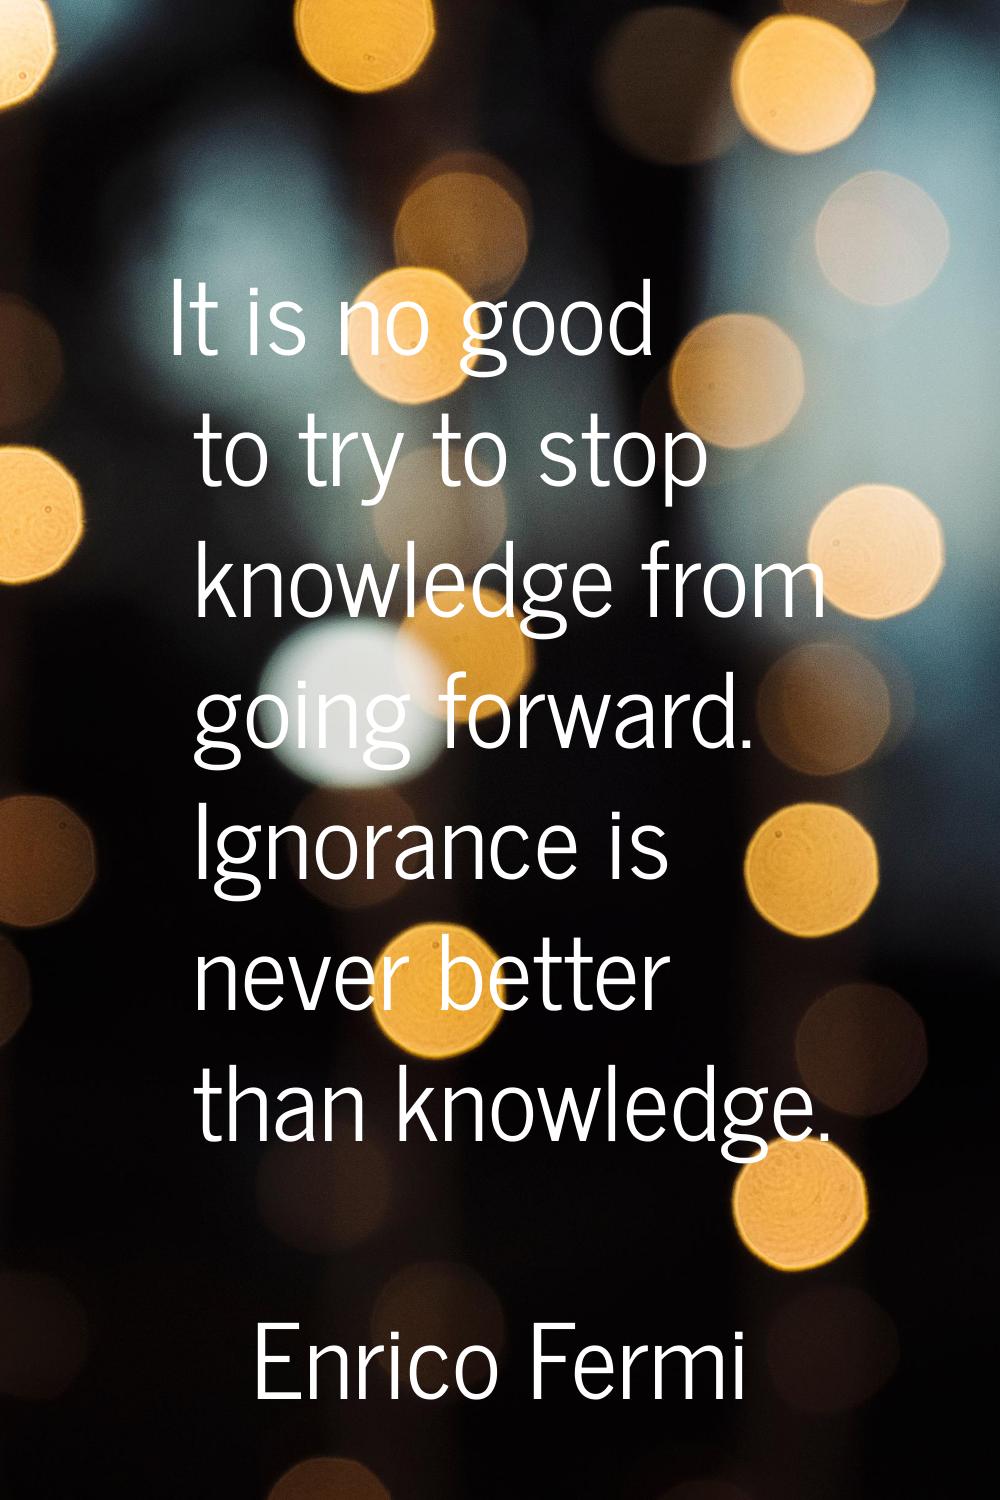 It is no good to try to stop knowledge from going forward. Ignorance is never better than knowledge